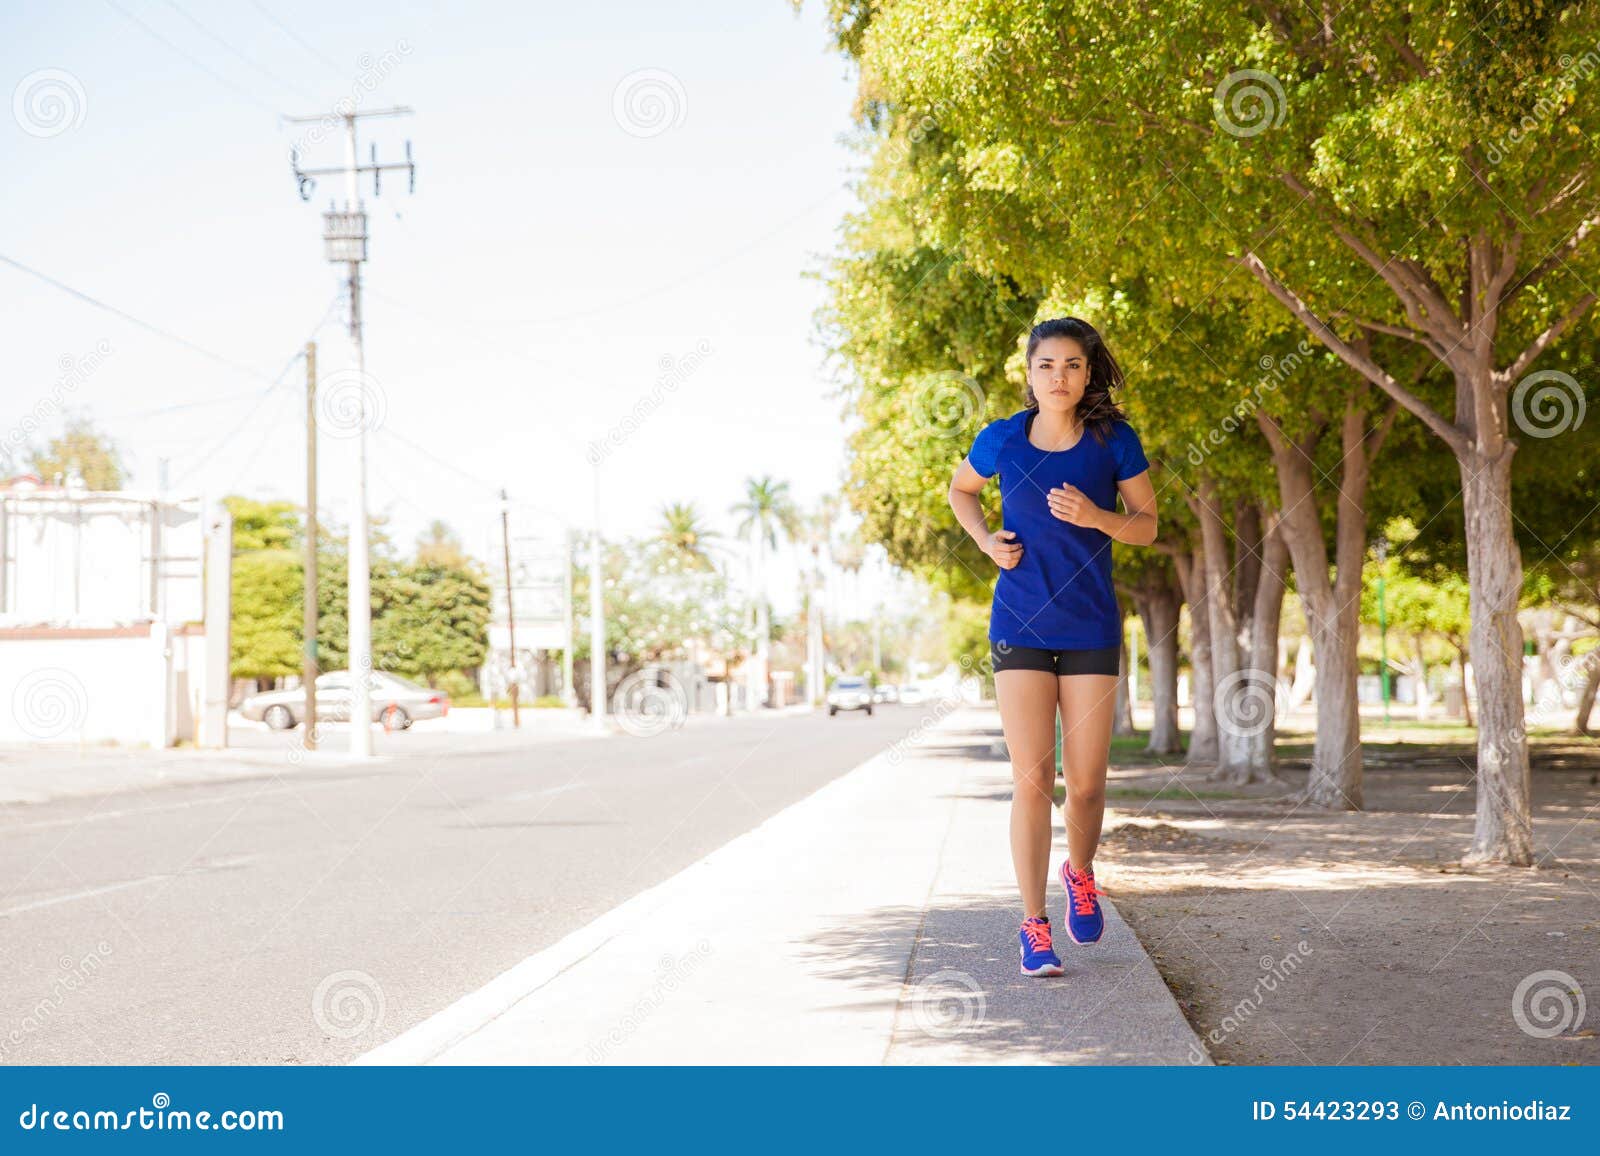 Running On A Sunny Day Stock Image Image Of City Space 54423293